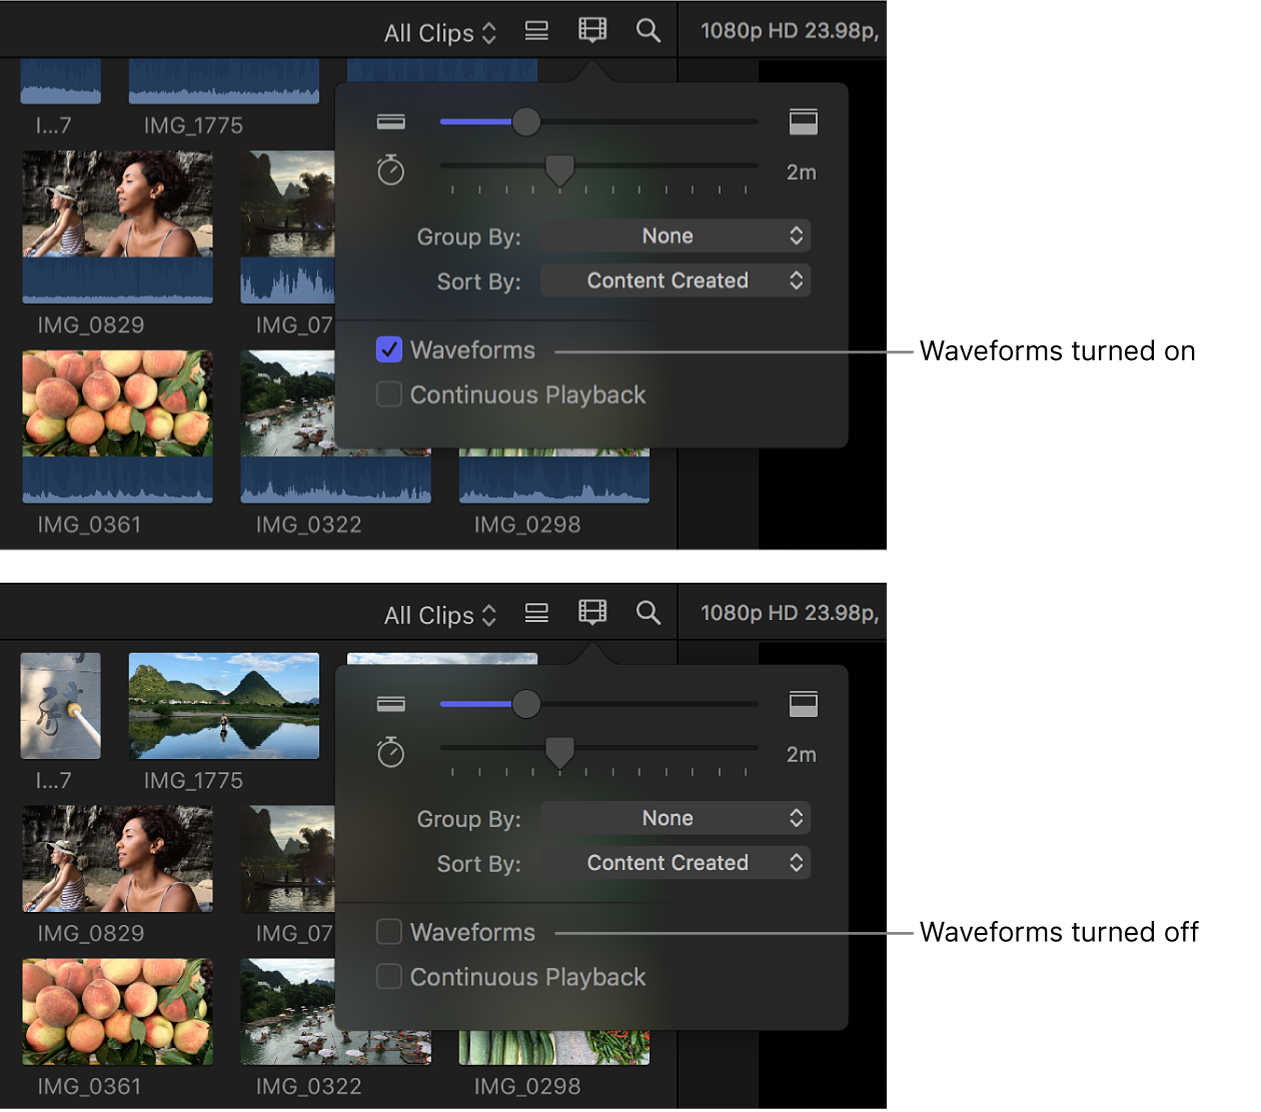 Filmstrips in the browser before and after audio waveforms are turned off using the Waveforms checkbox